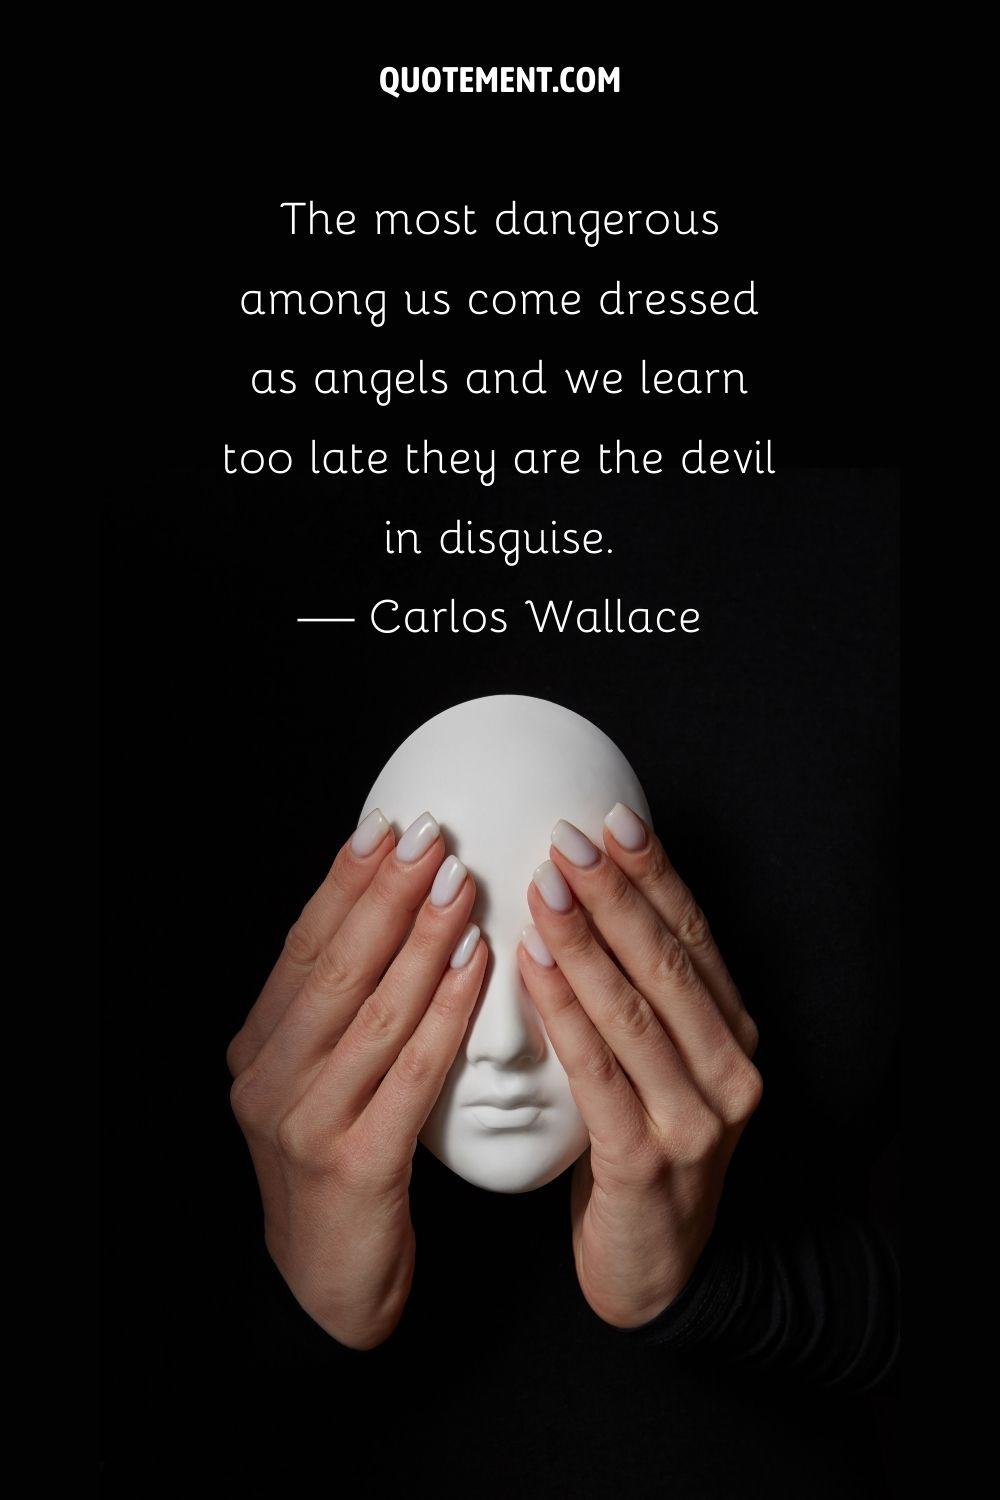 a woman's hand holding a white mask image representing two faced people quote